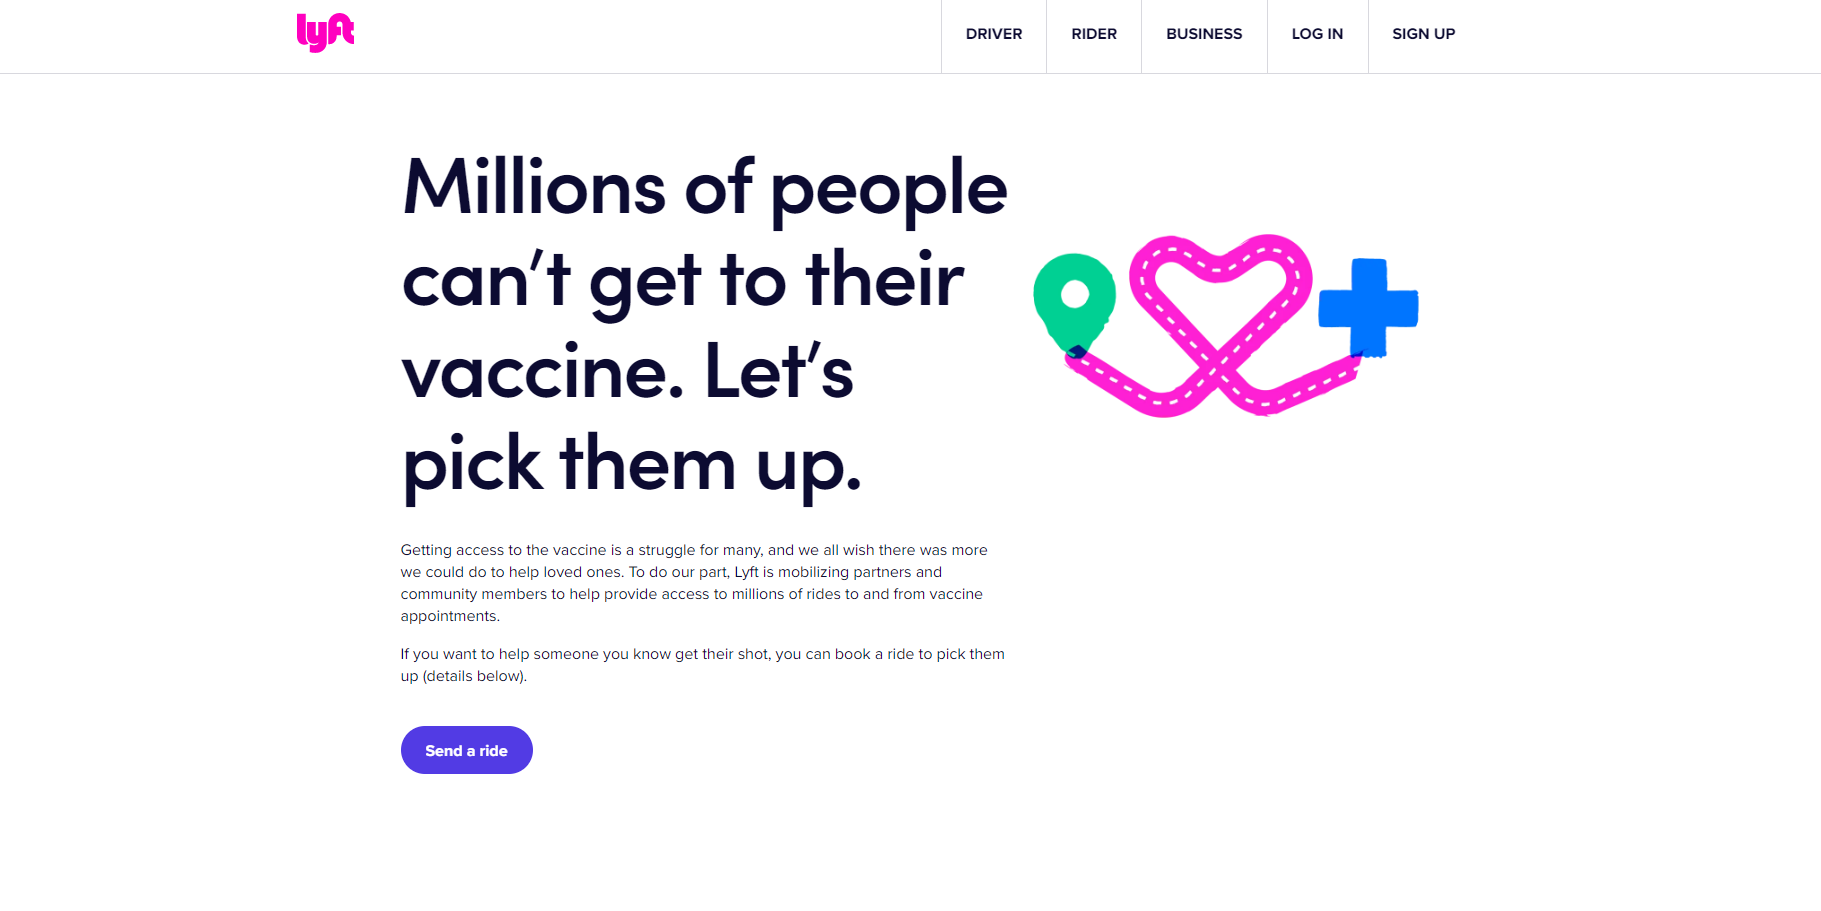 Website with white background and black text. Lyft logo is at the top left corner and there is a sample navigation map from point A to point B with a road shaped like a heart.